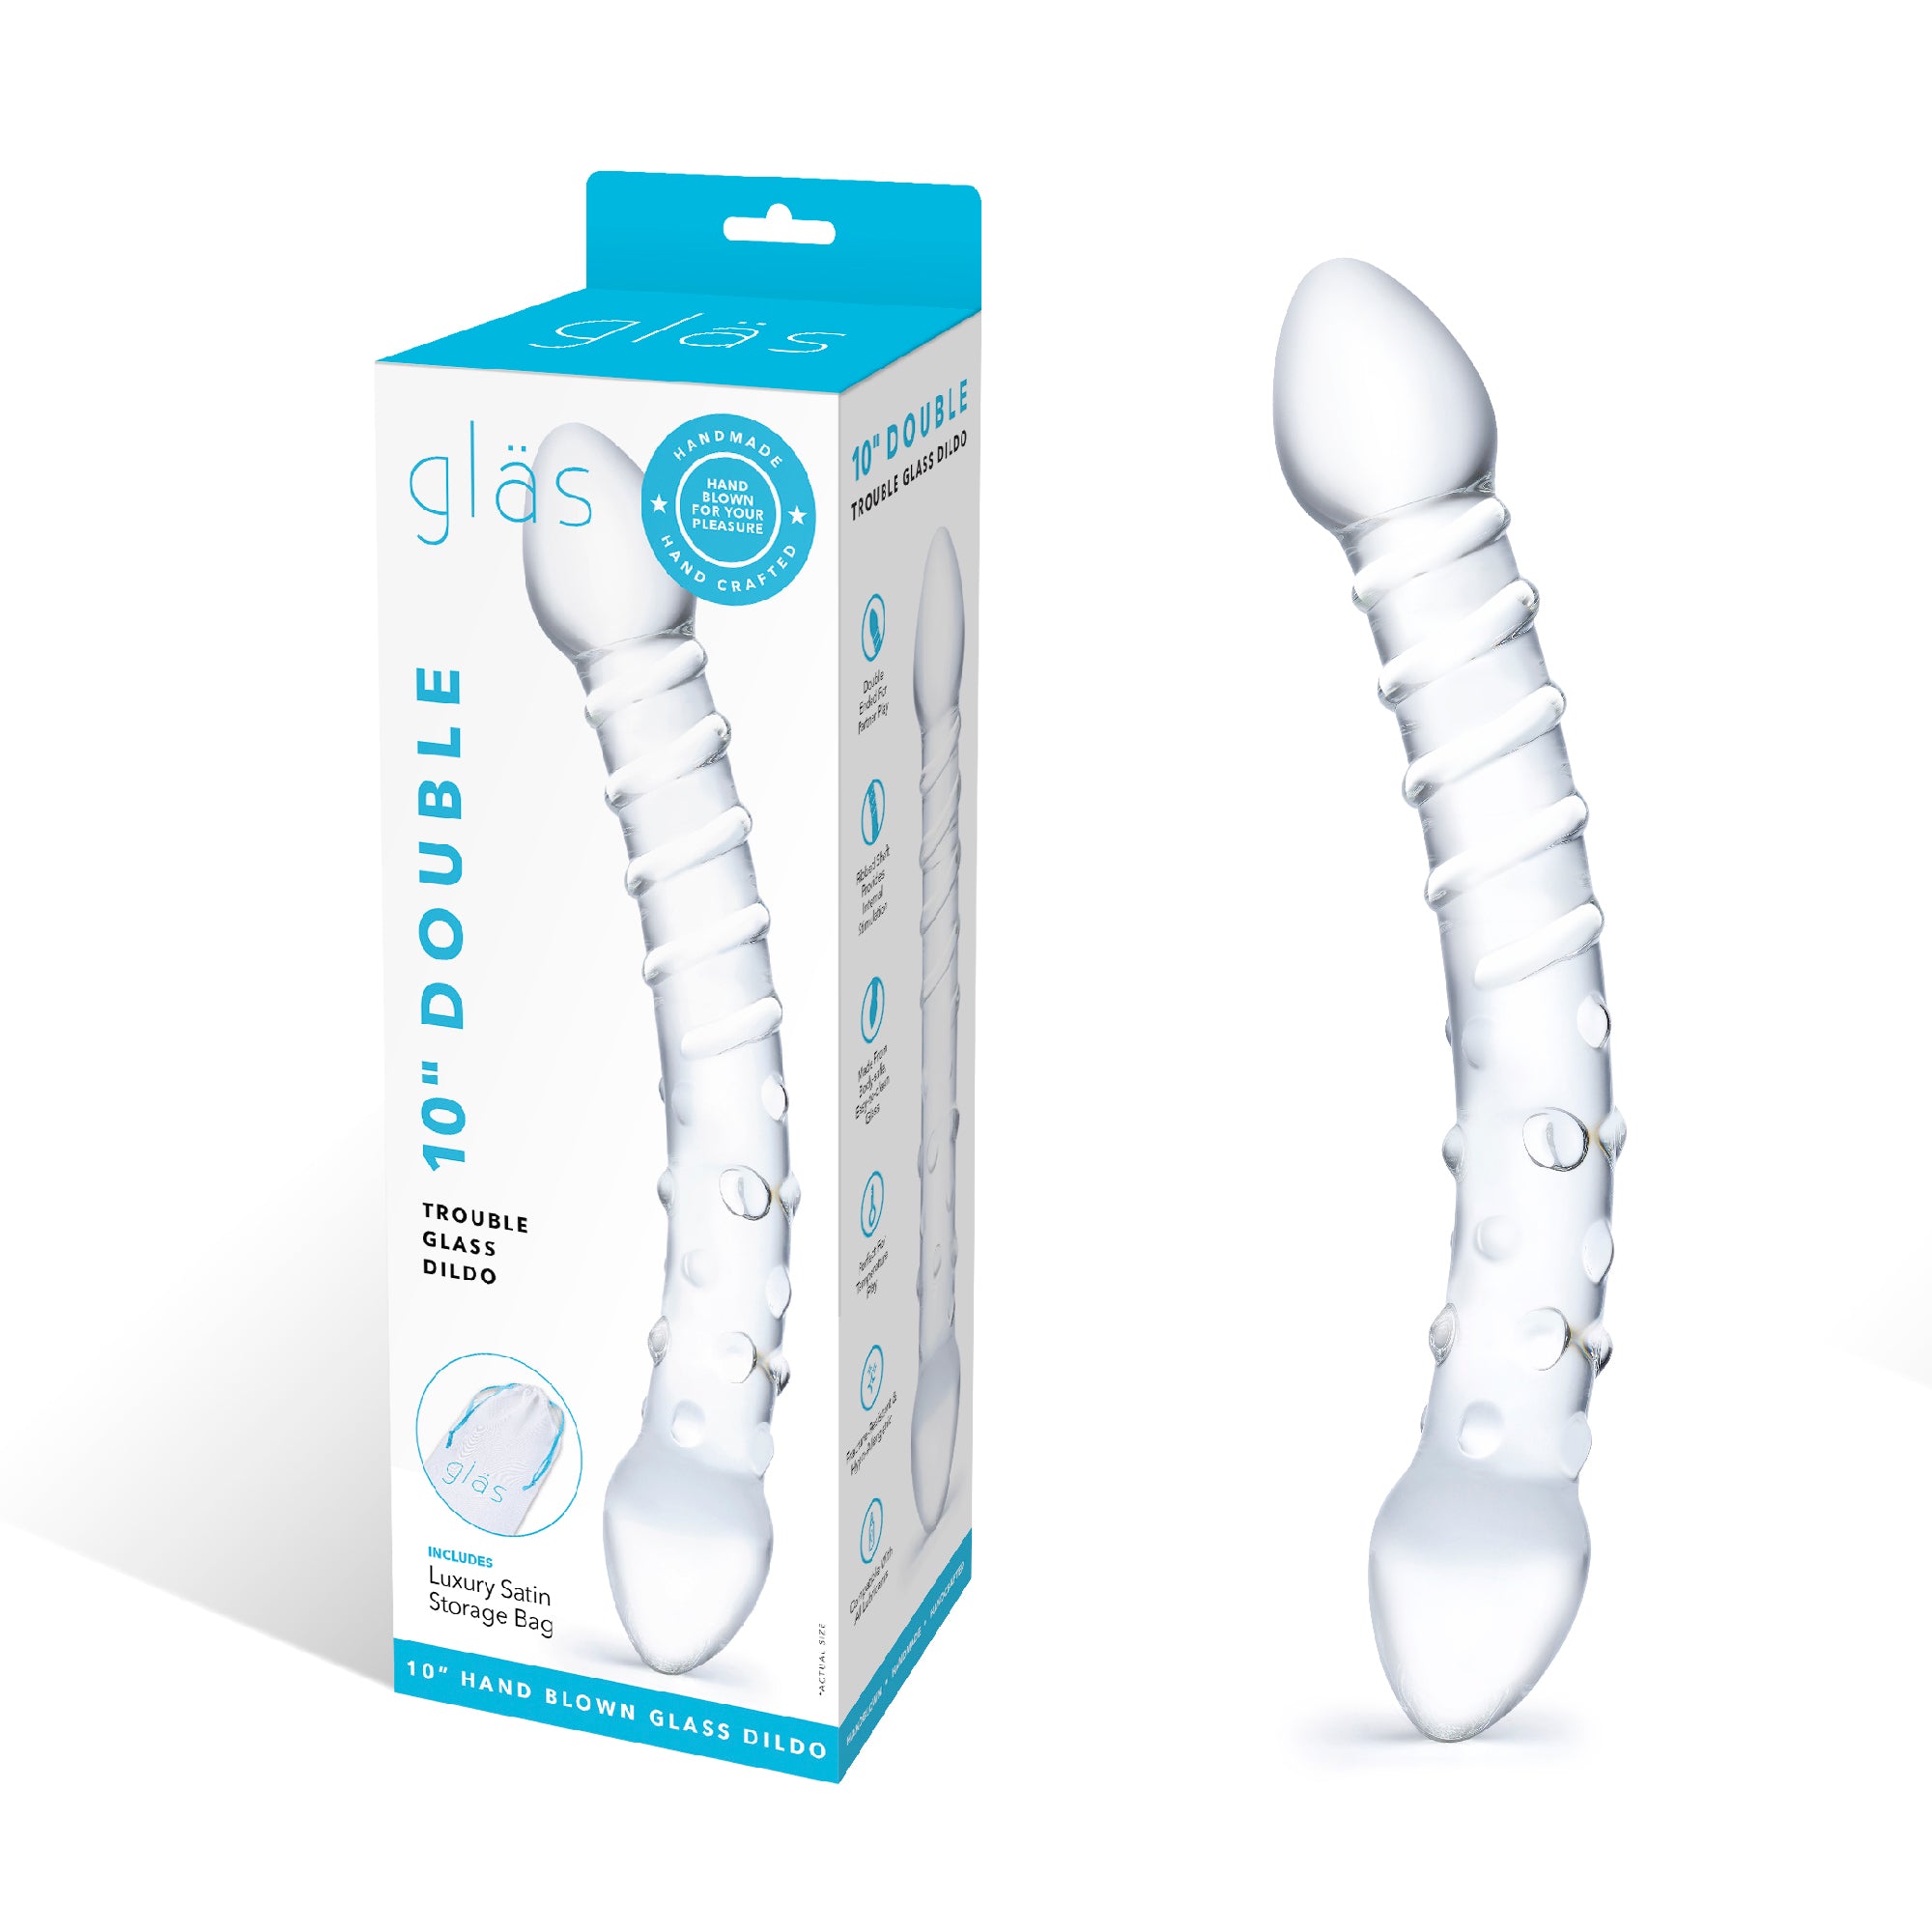 Packaging of the Gläs Double Trouble Glass Dildo